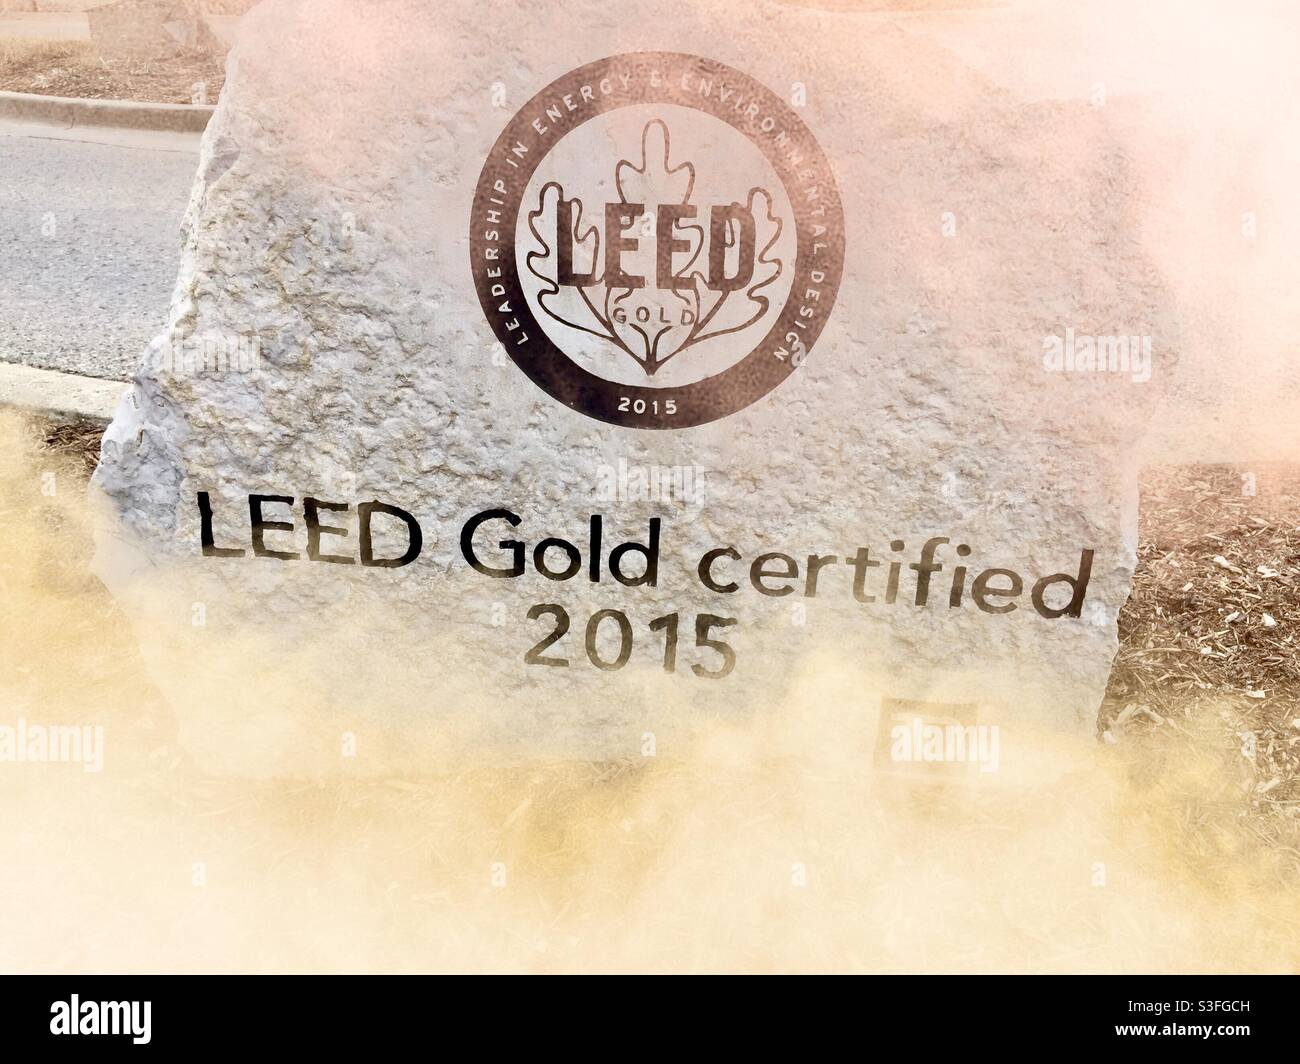 LEED Gold certified. Leadership in energy and environmental design. Green buildings. The LEED program is a global environmental certification program for building projects. Stock Photo